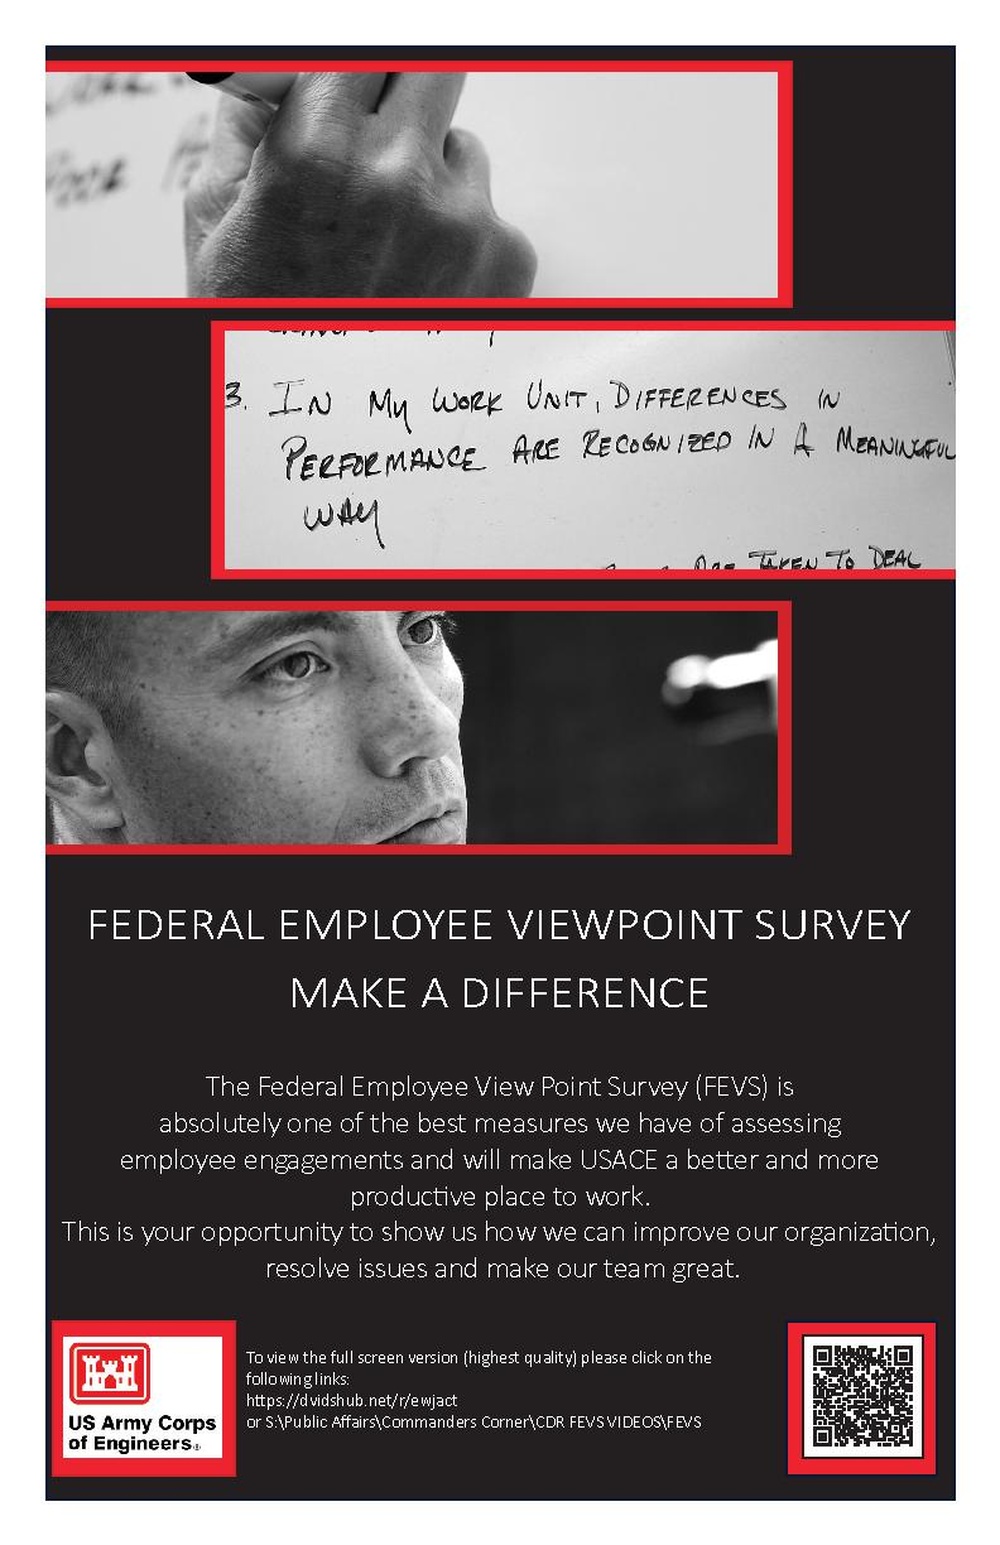 The Federal Employee Viewpoint Survey